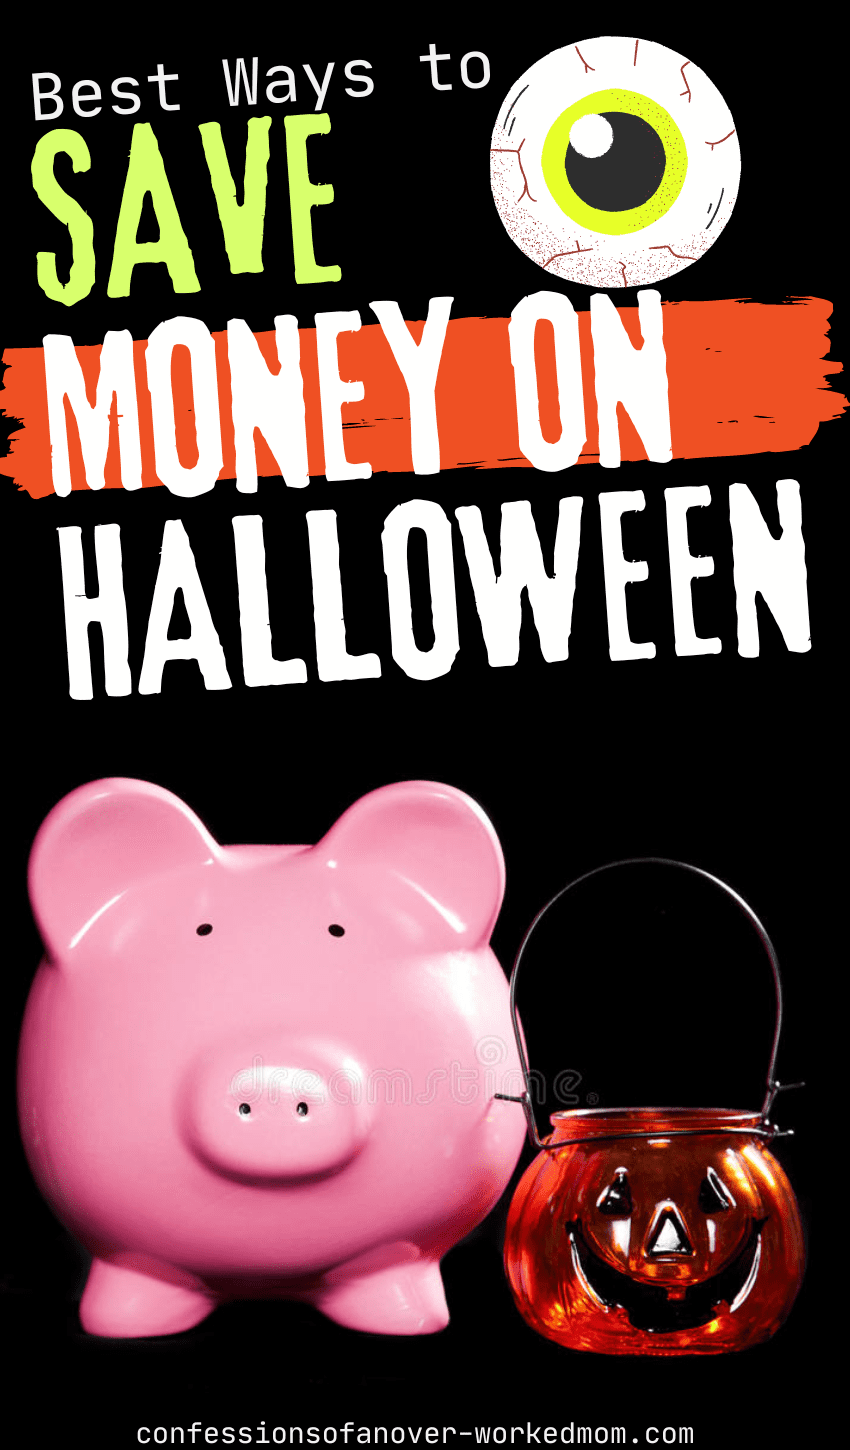 There are so many things to do during the Halloween season that it can get expensive if you’re not careful. I’m sharing the best ways to save money on Halloween. 